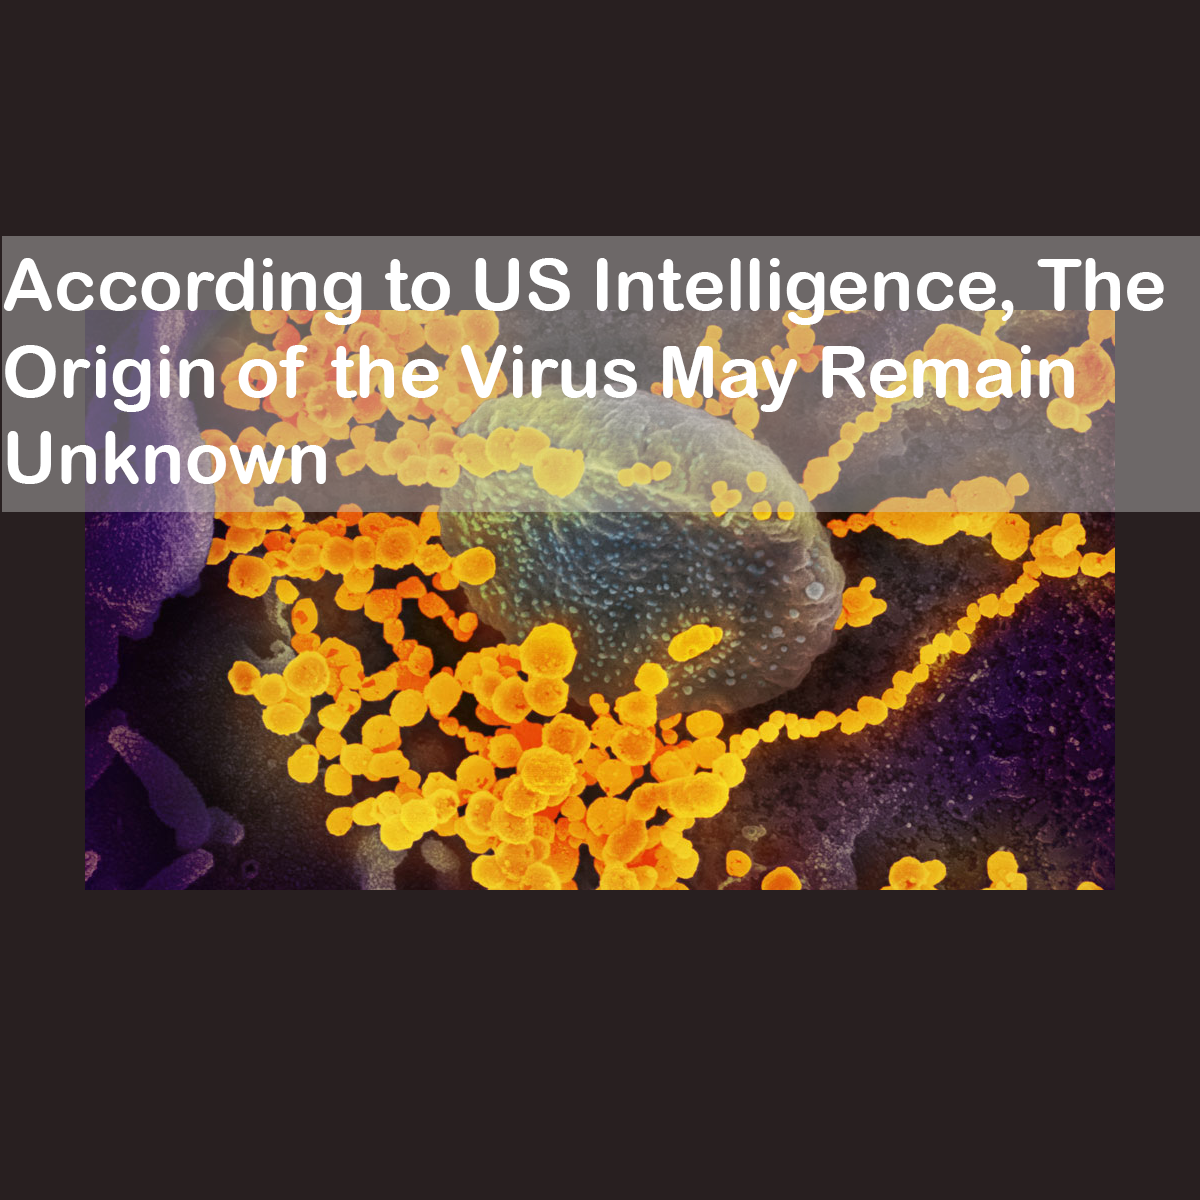 According to US Intelligence, The Origin of the Virus May Remain Unknown